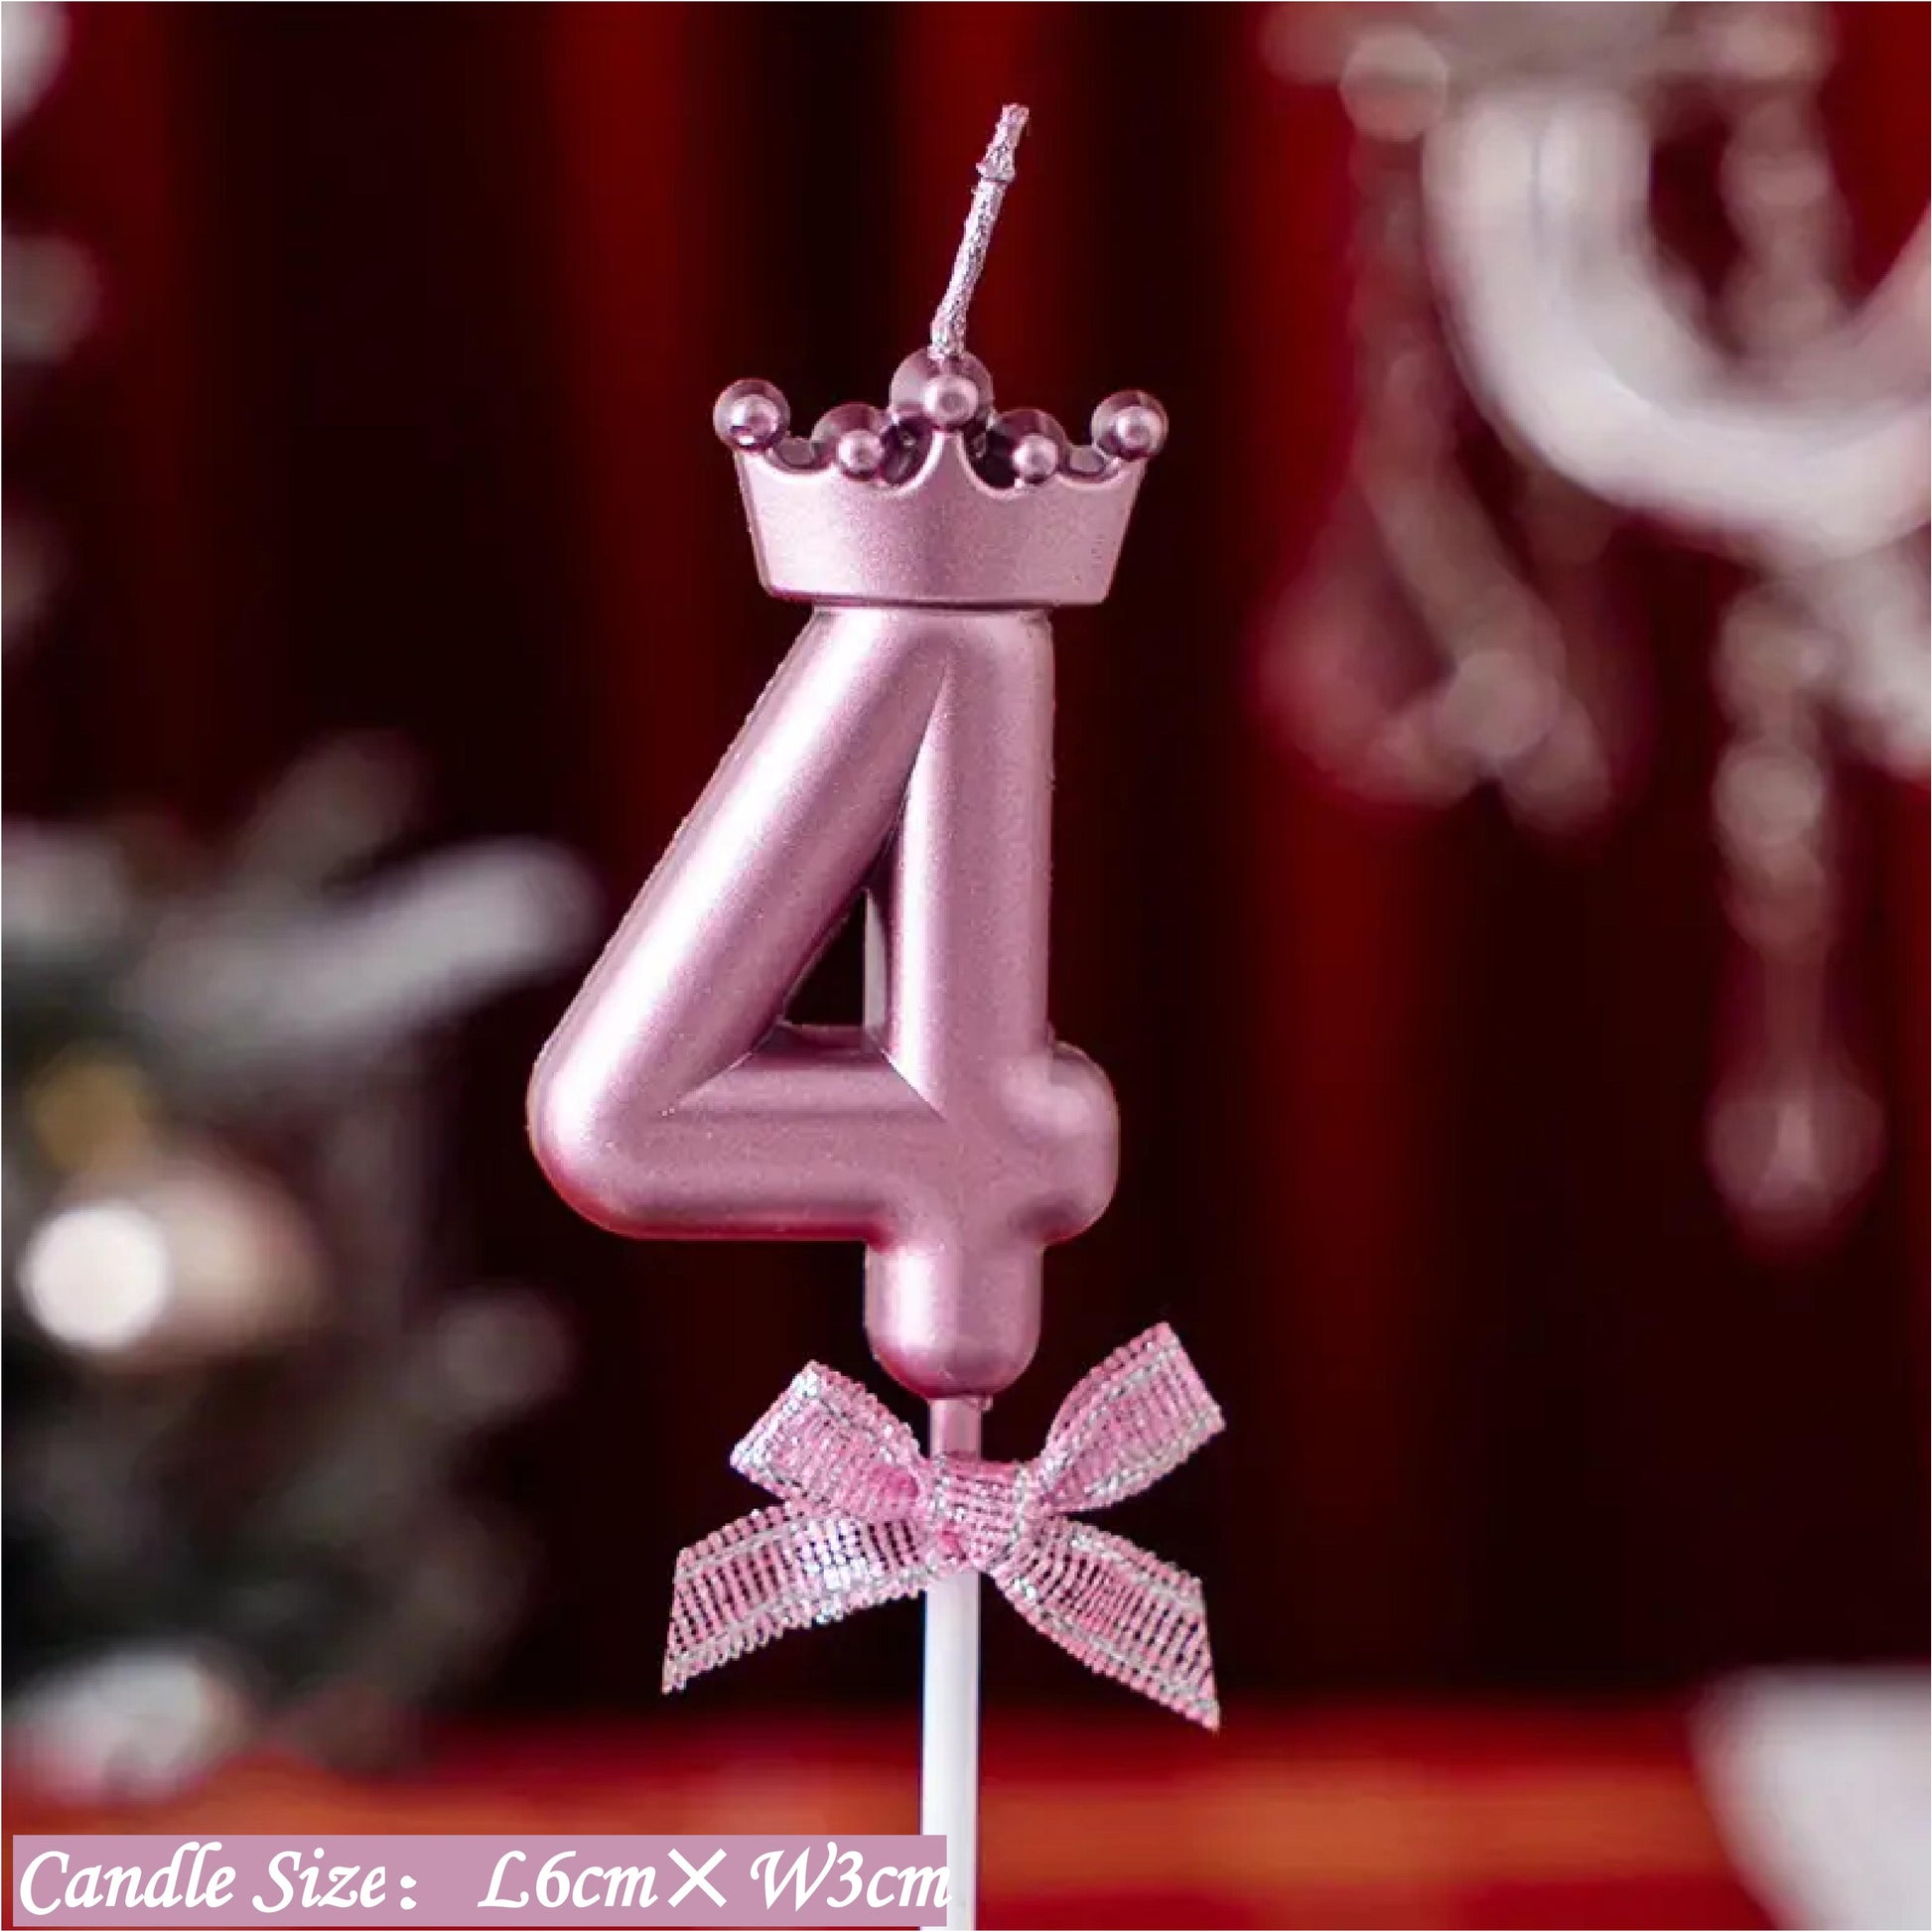 0-9 Number Birthday Candles, Number Candles With Crown And Bow Decorations, Cake Decorations, Number Candles For Birthday Cakes, Weddings, Anniversaries, Graduations, Holidays, Parties